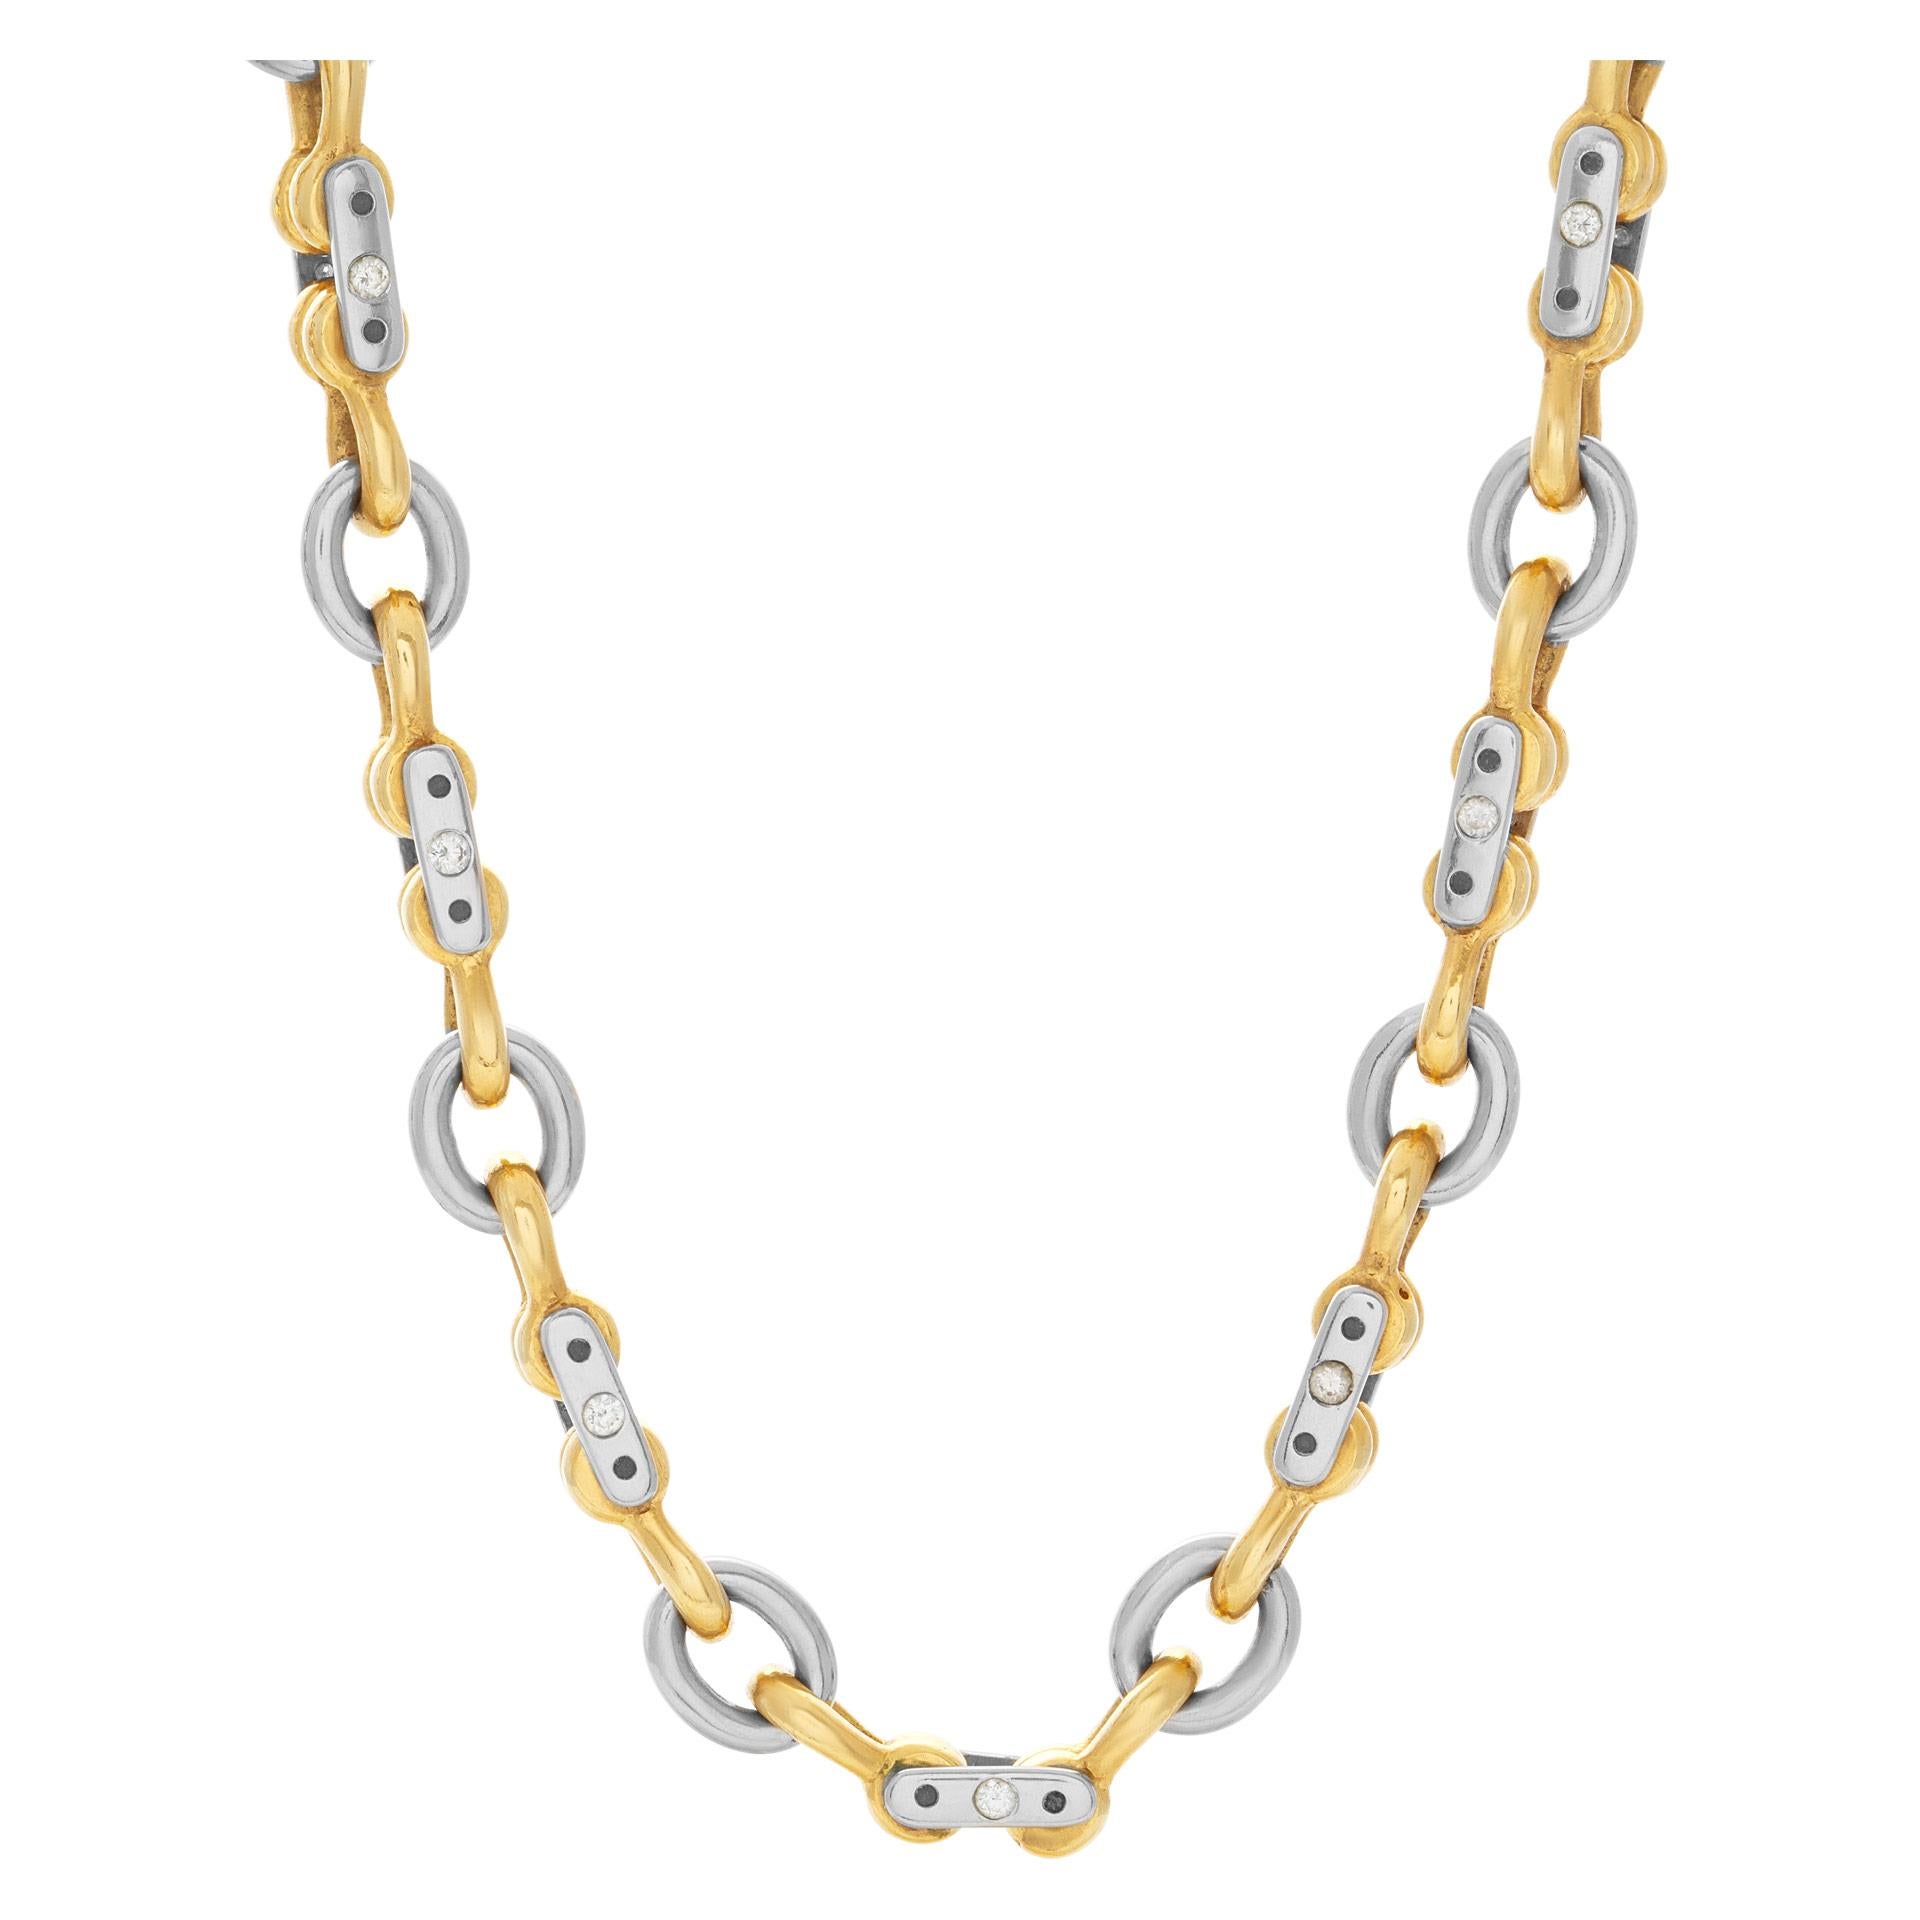 Mechanical link 18k white & yellow gold chain with approximately 1.32 carat in G-H color, VS clarity diamond accents (each diamond 0.03 carat 44 stones). Length 22 inches. Width 6.5mm.
